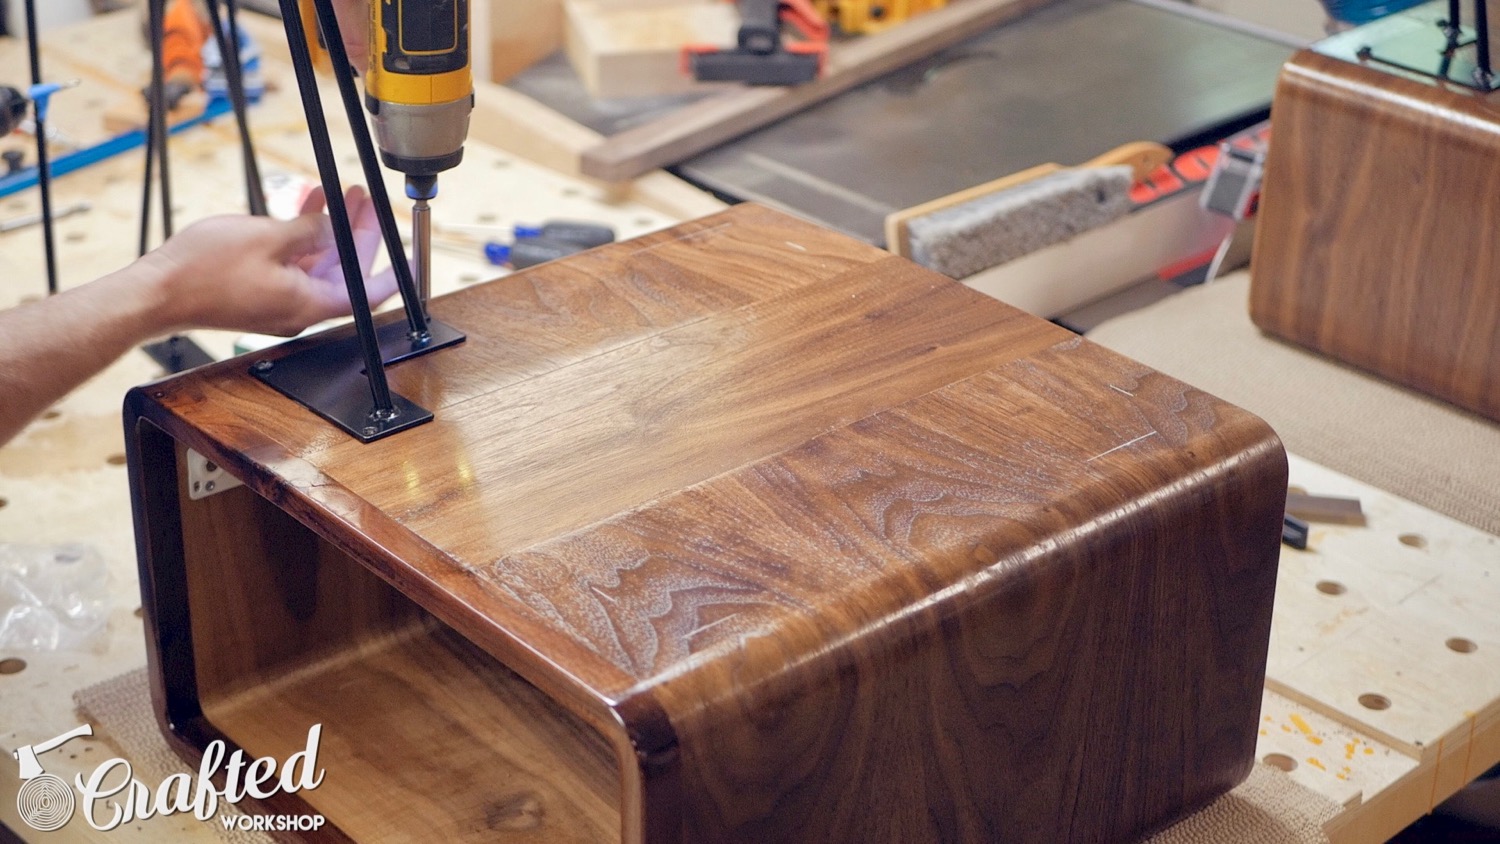 Power Carving The Dune End Table // How To - Woodworking — Crafted  Workshop